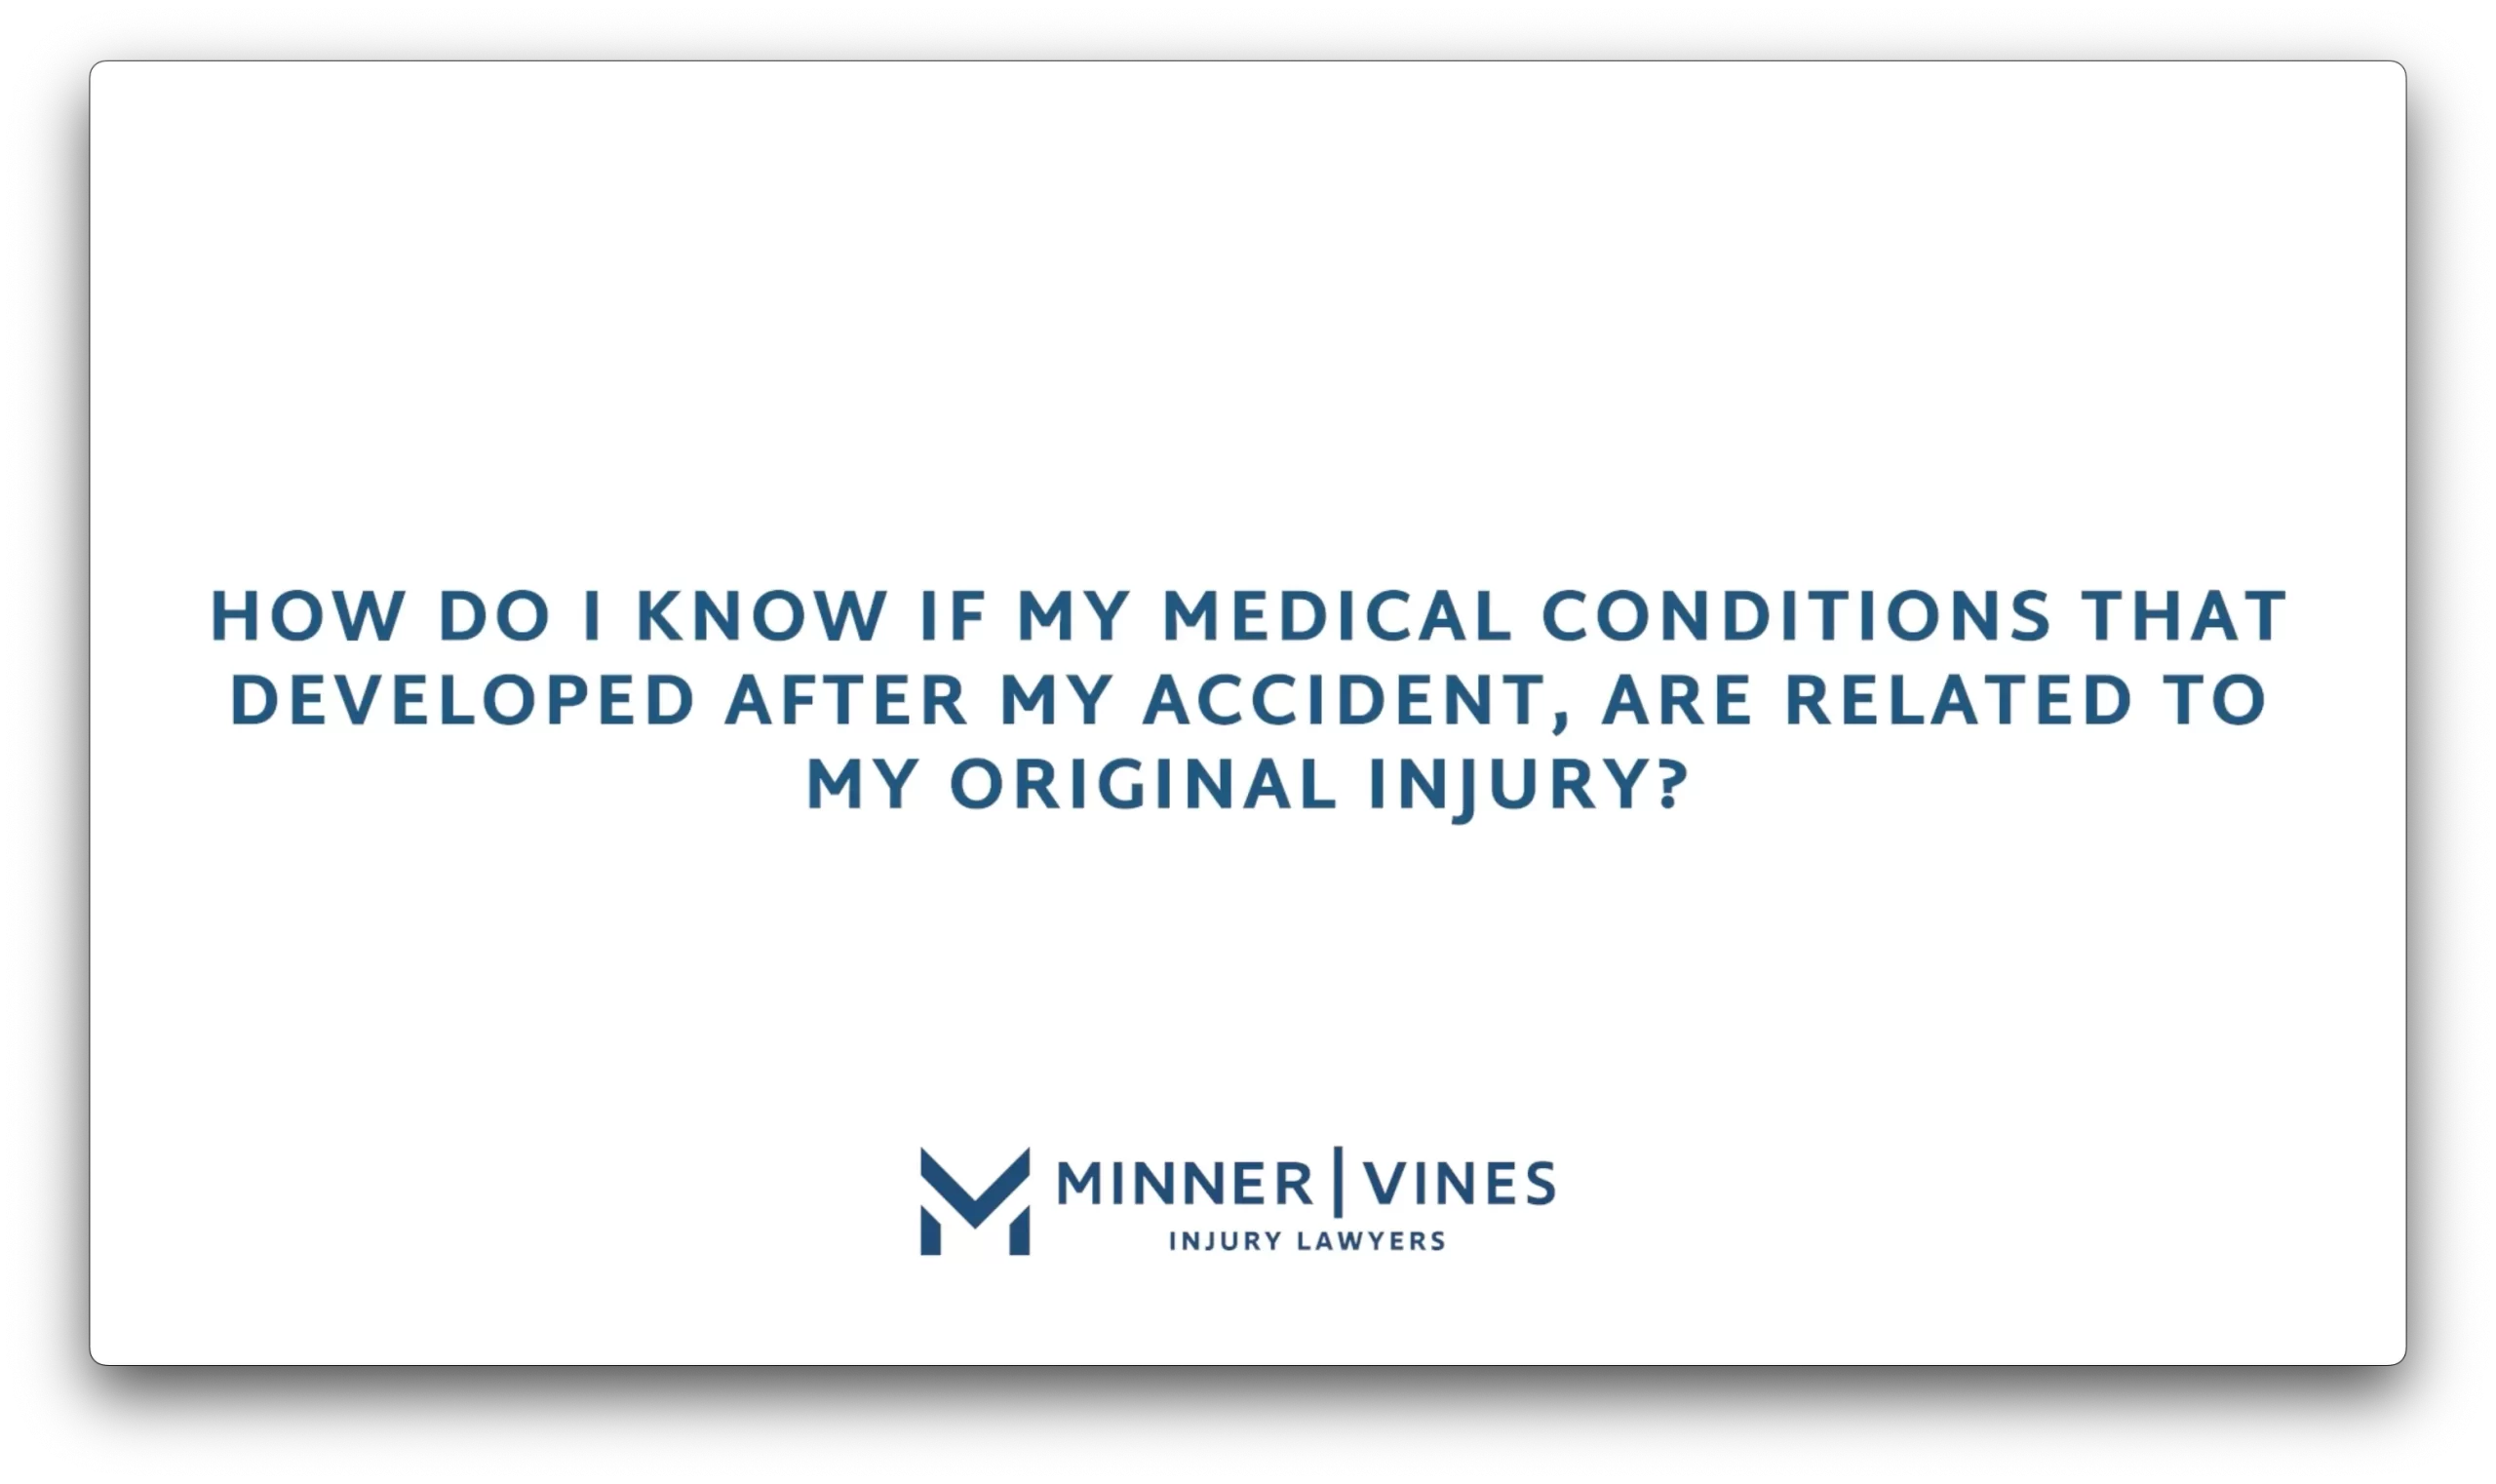 How do I know if my medical conditions that developed after my accident, are related to my original injury?